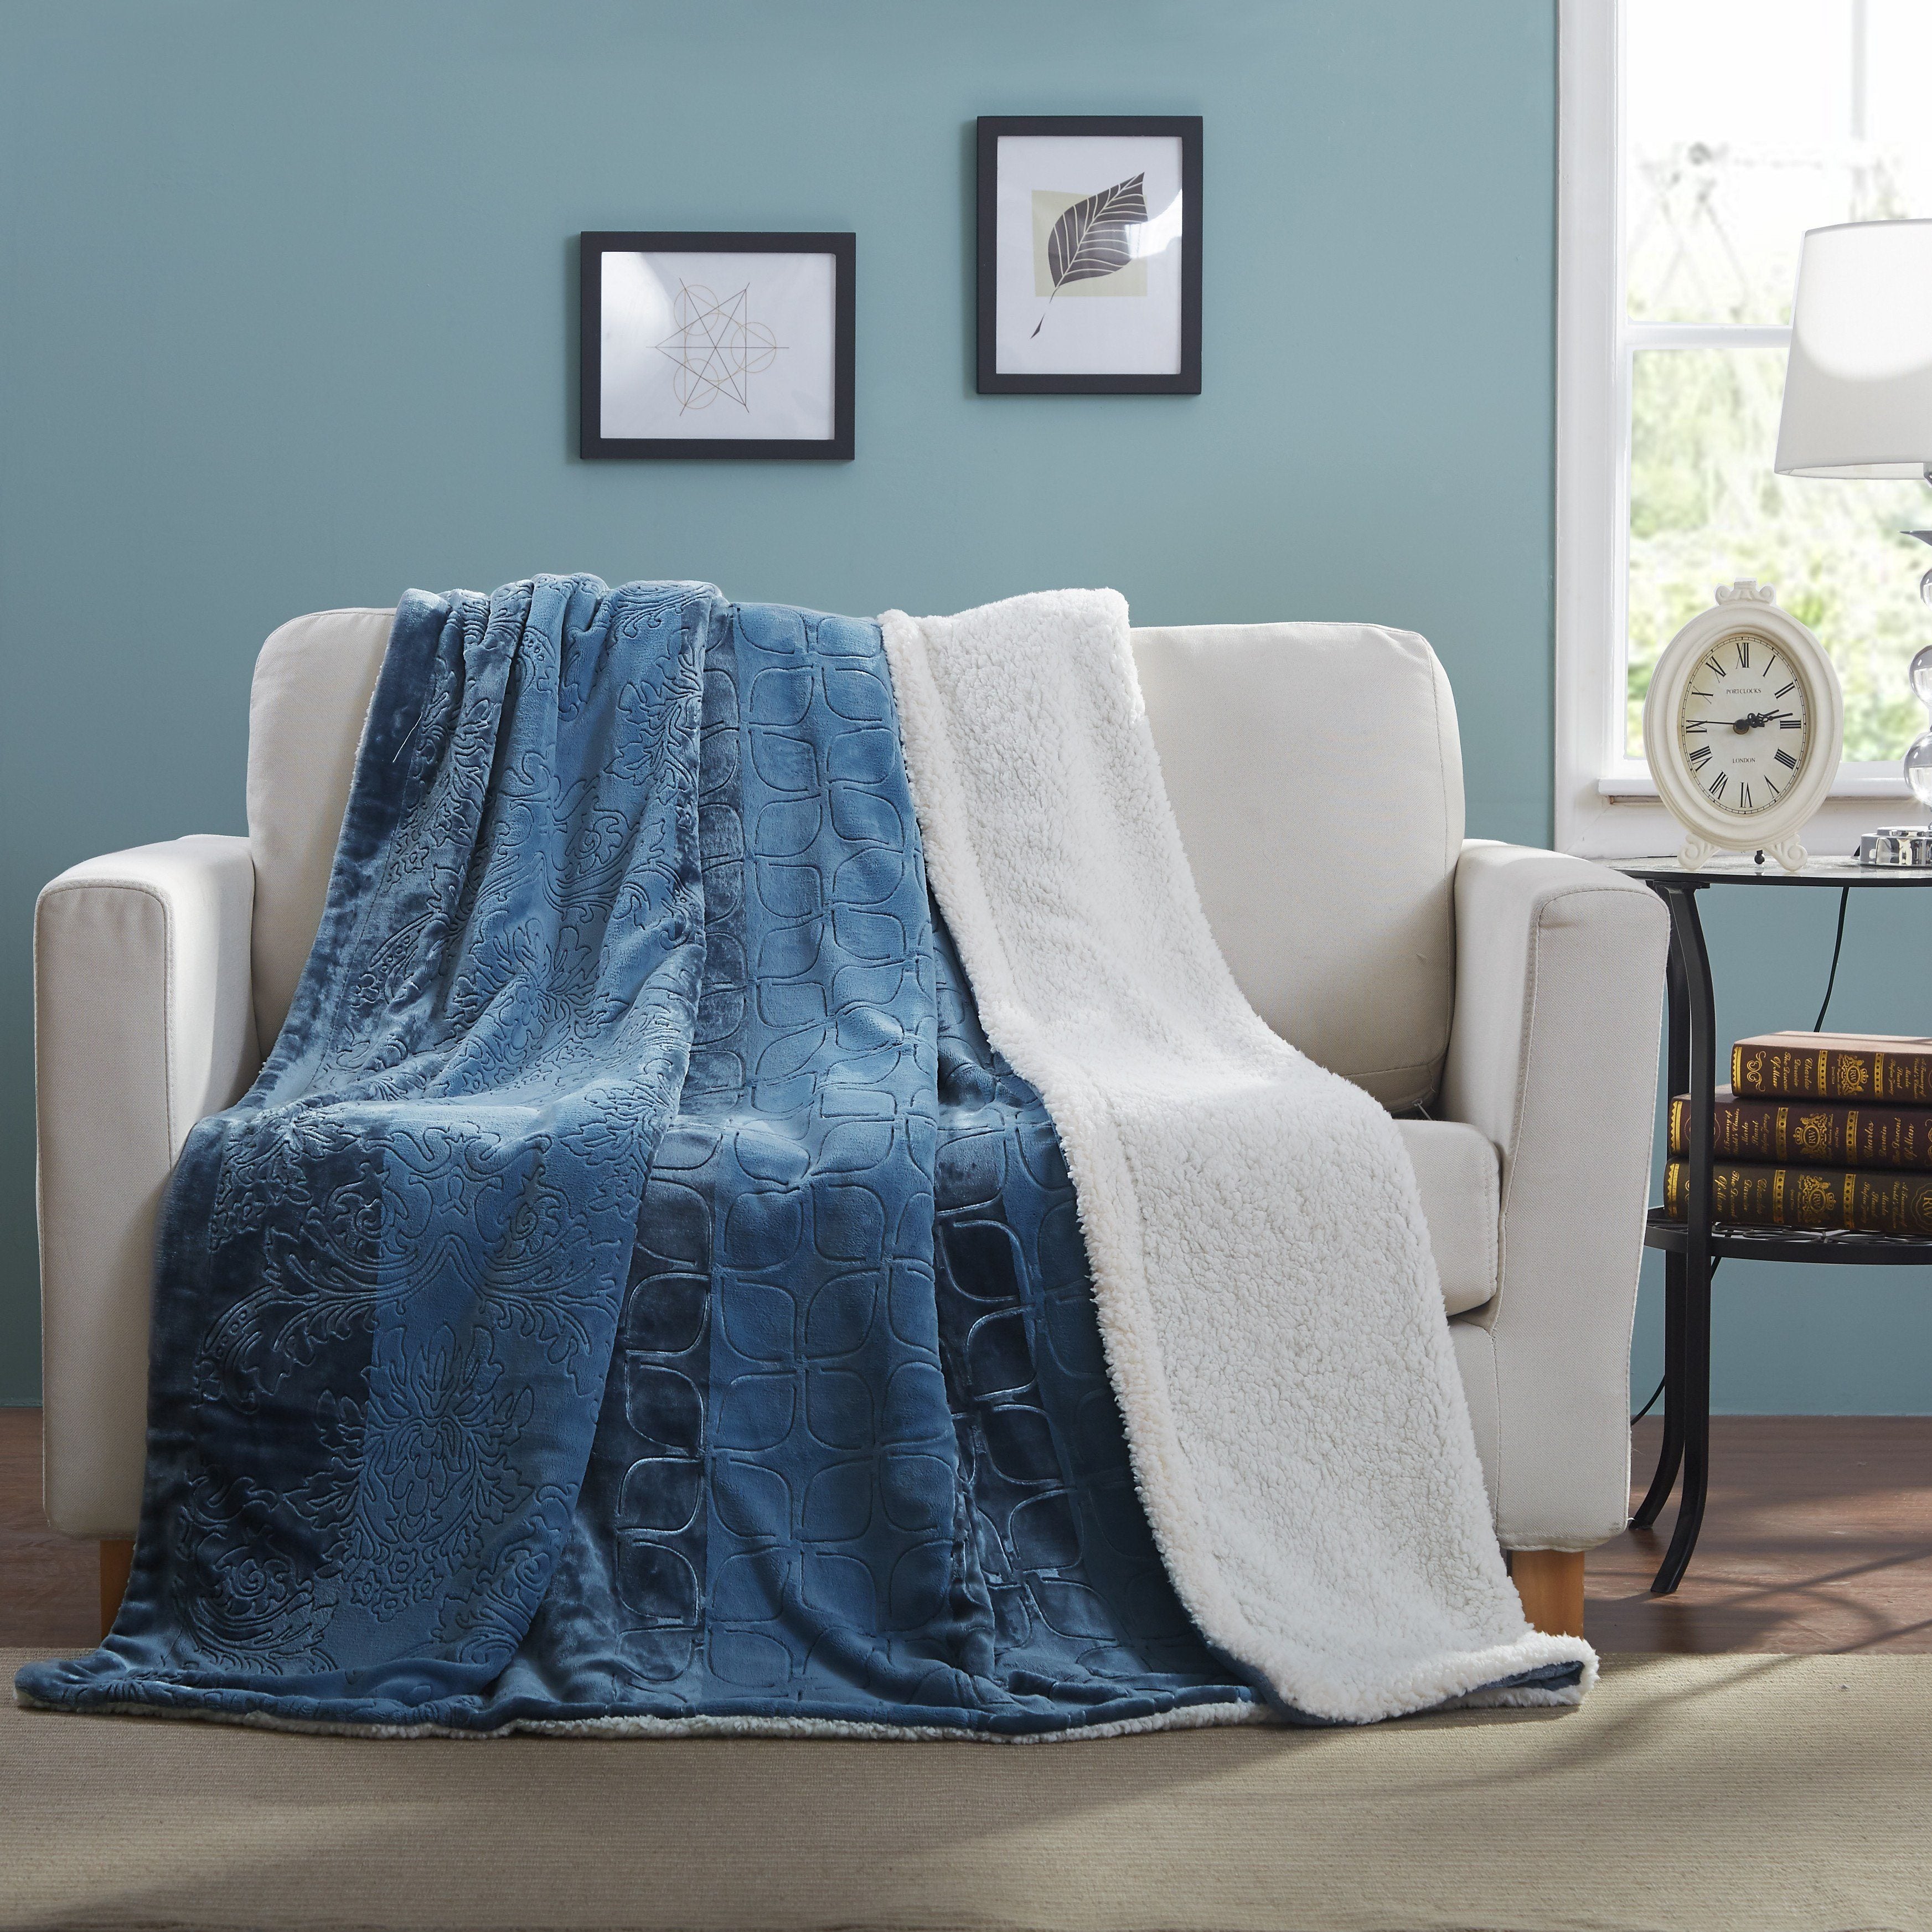 Tache Solid Embossed Rainy Day Grey Blue Sherpa Throw Blanket (62090) - Tache Home Fashion